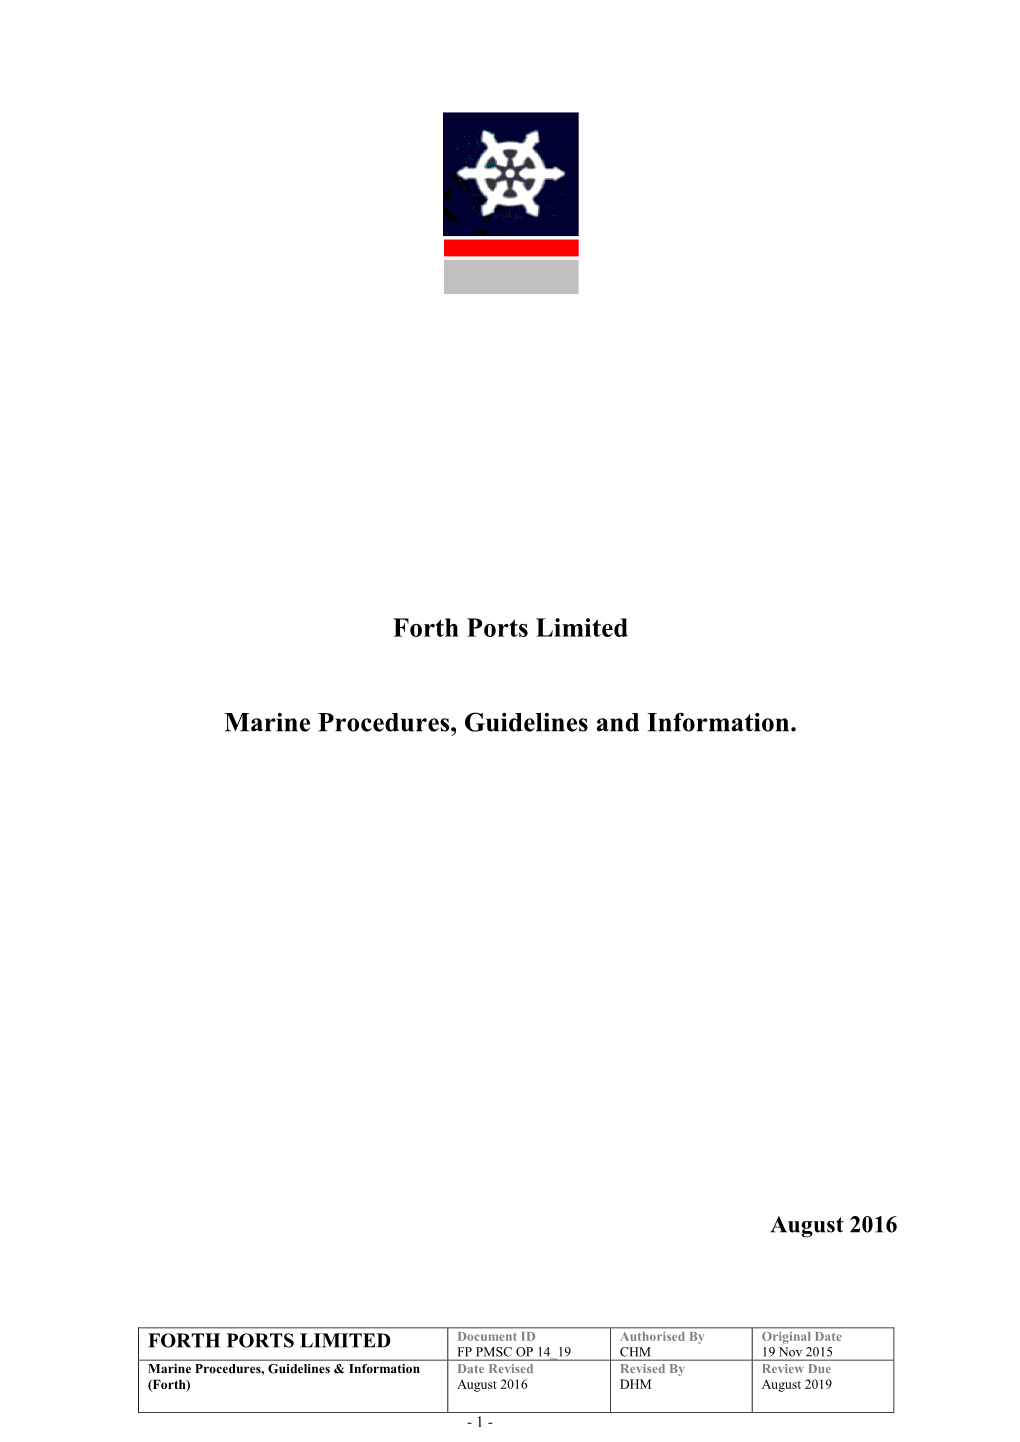 Forth Ports Limited Marine Procedures, Guidelines and Information